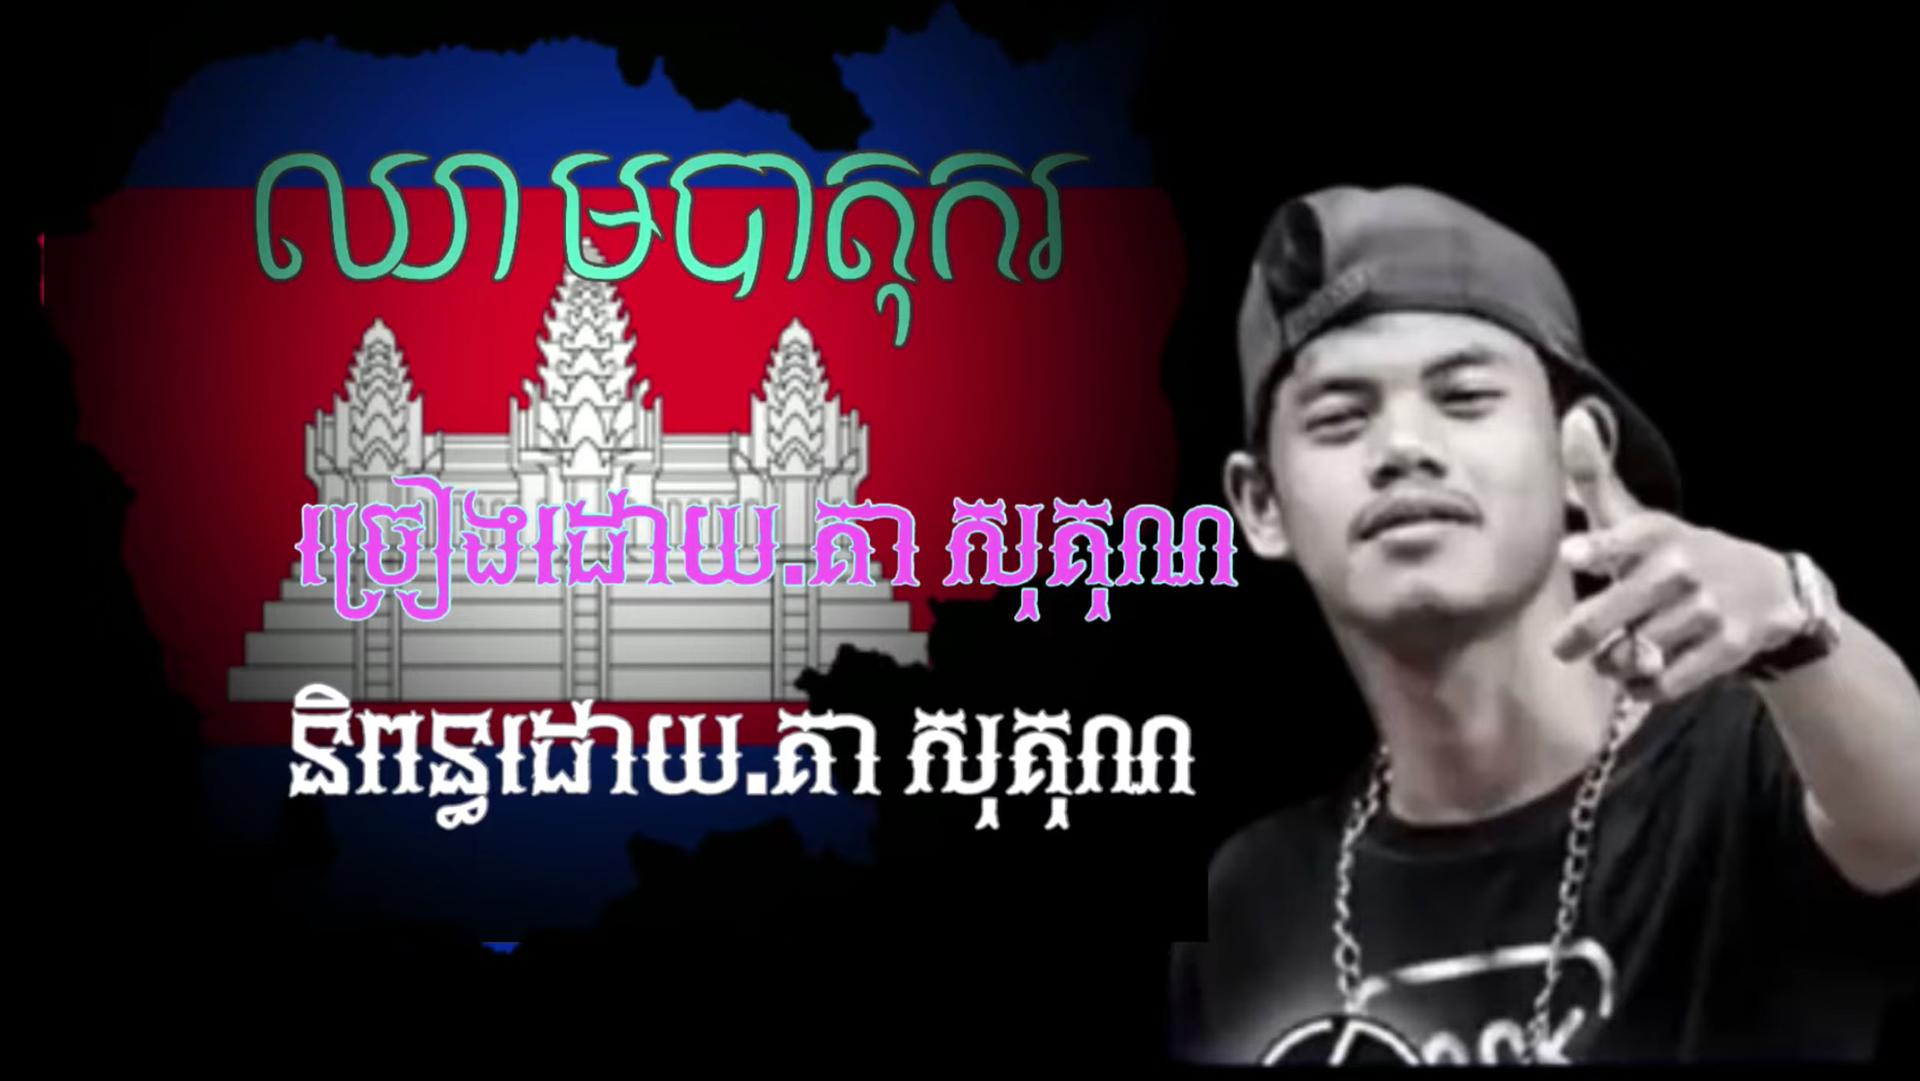 Kea Sokun is a rapper who sings about social justice issues in Cambodia. 